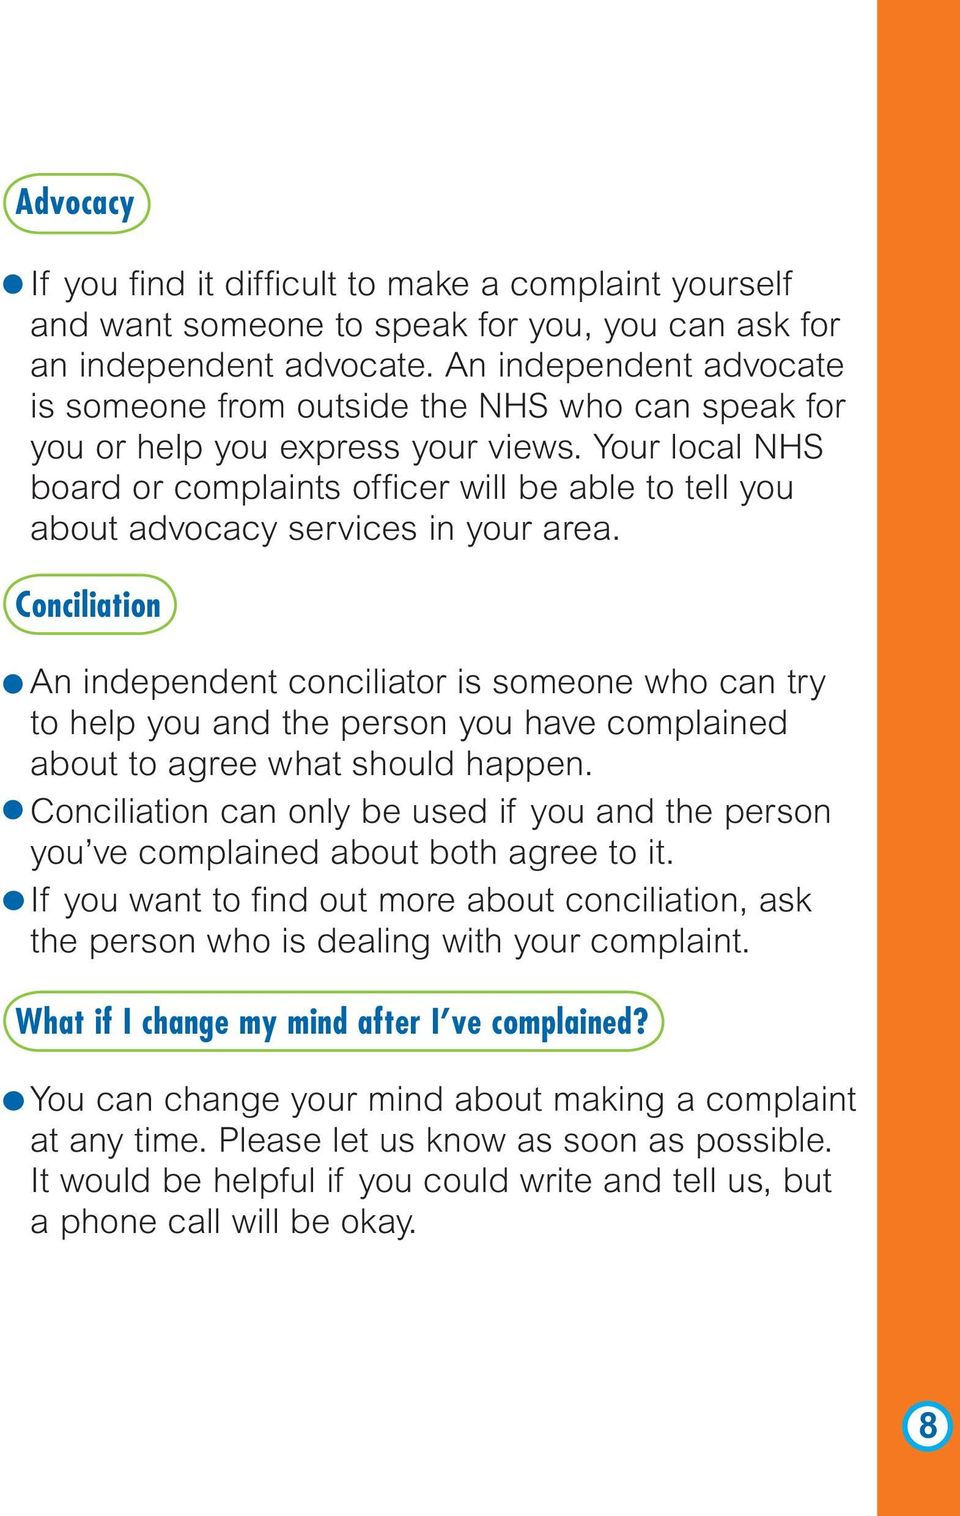 Your local NHS board or complaints officer will be able to tell you about advocacy services in your area.